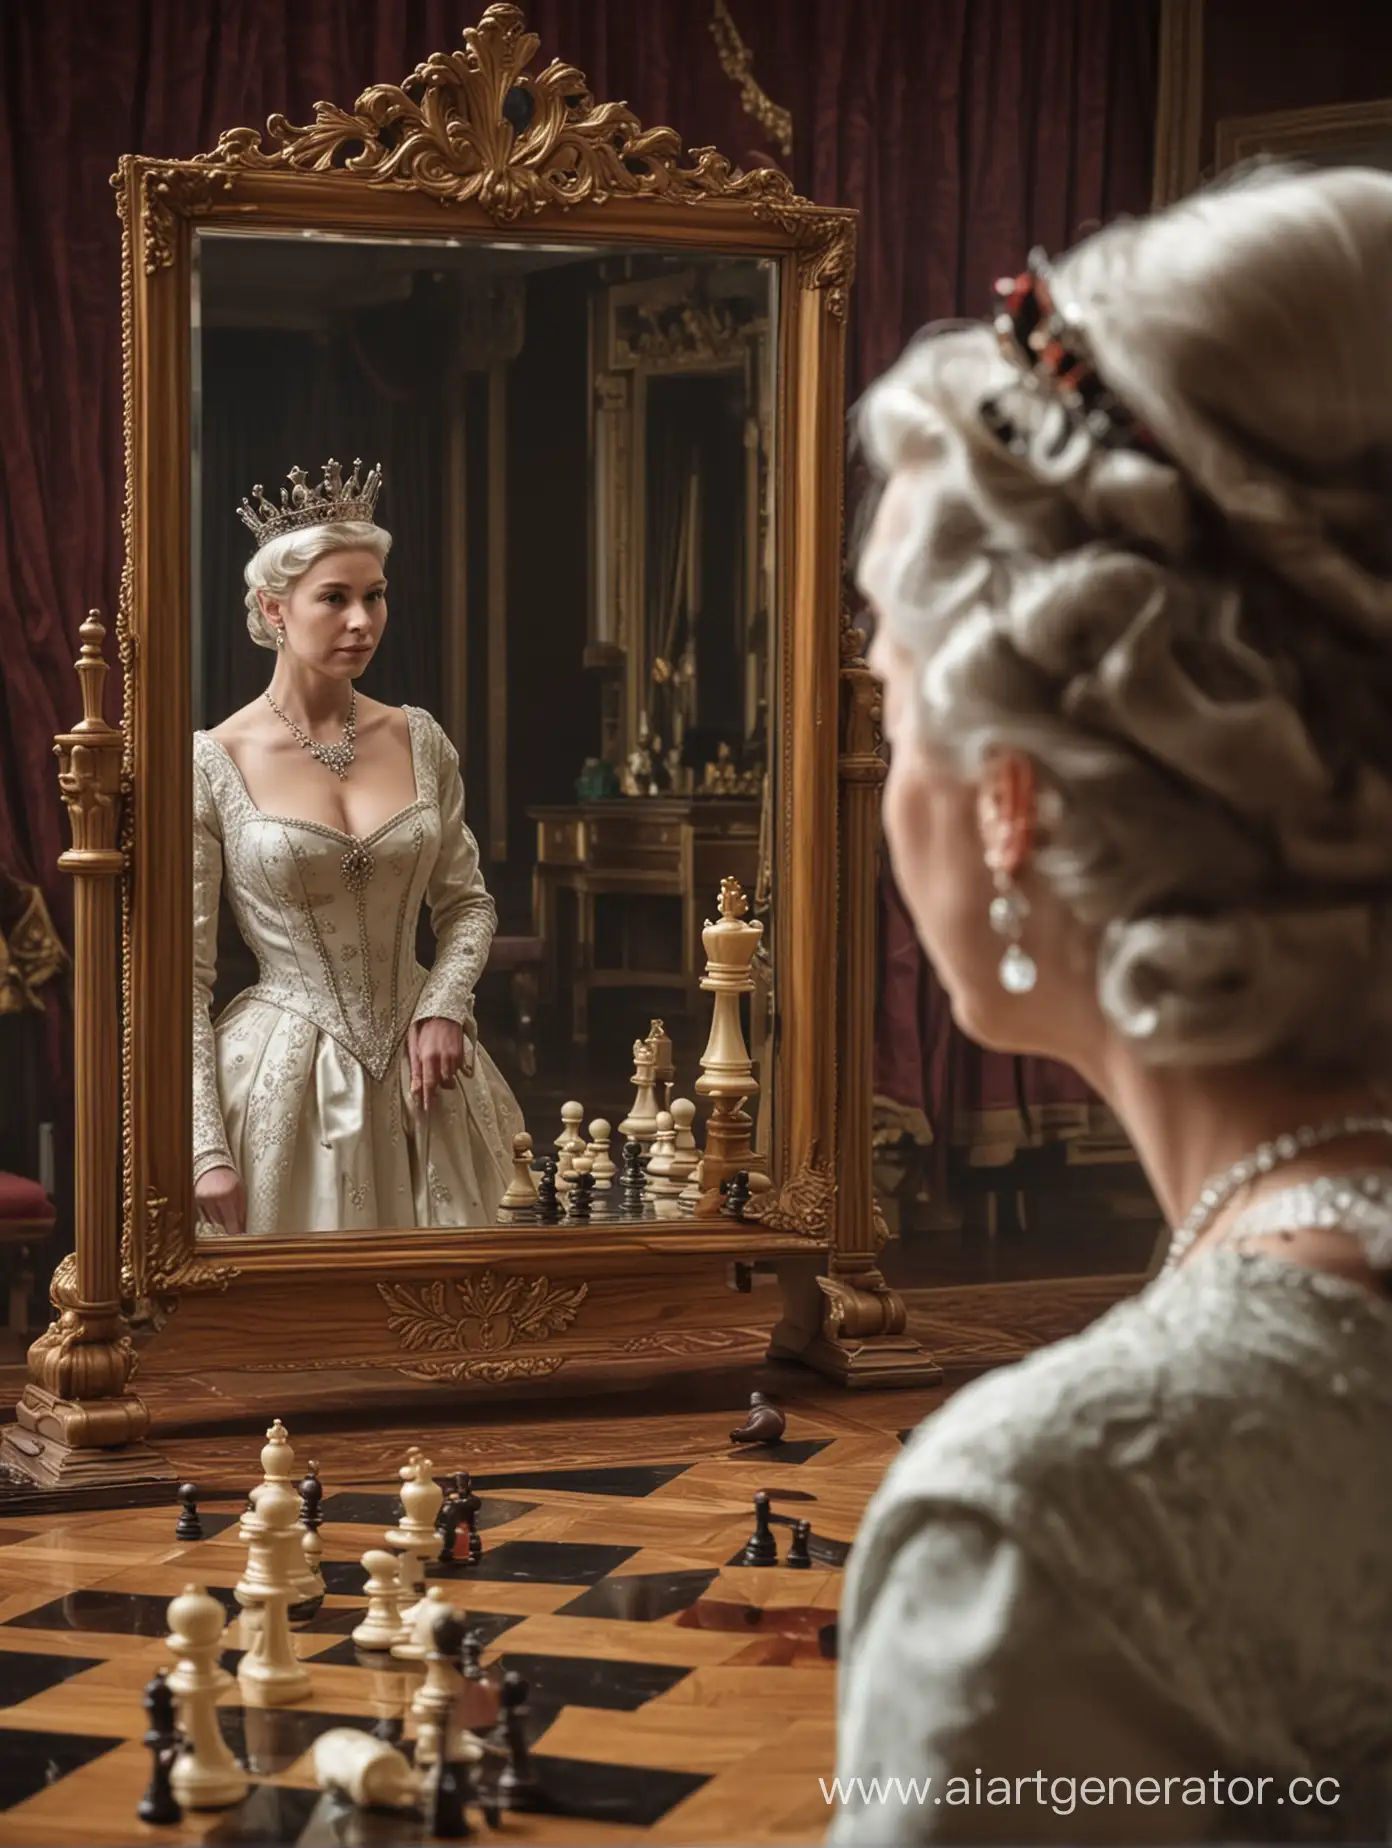 Pawn-Reflects-Queen-in-Mirror-Chess-Piece-SelfReflection-Art